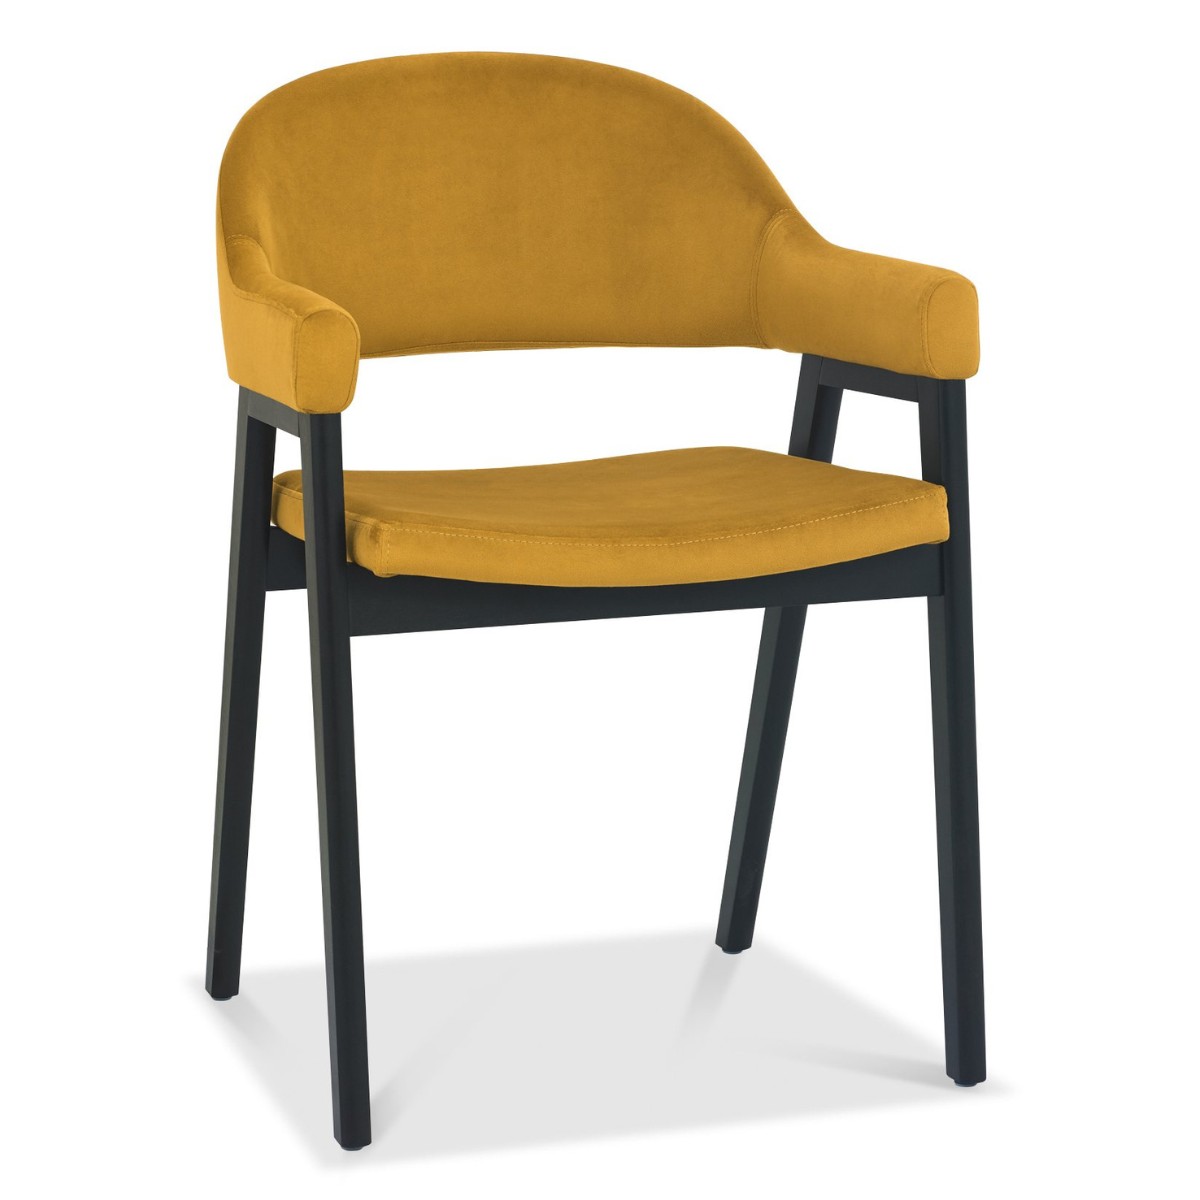 Chambery Weathered Oak Curved Back Dining Chair Yellow - 1